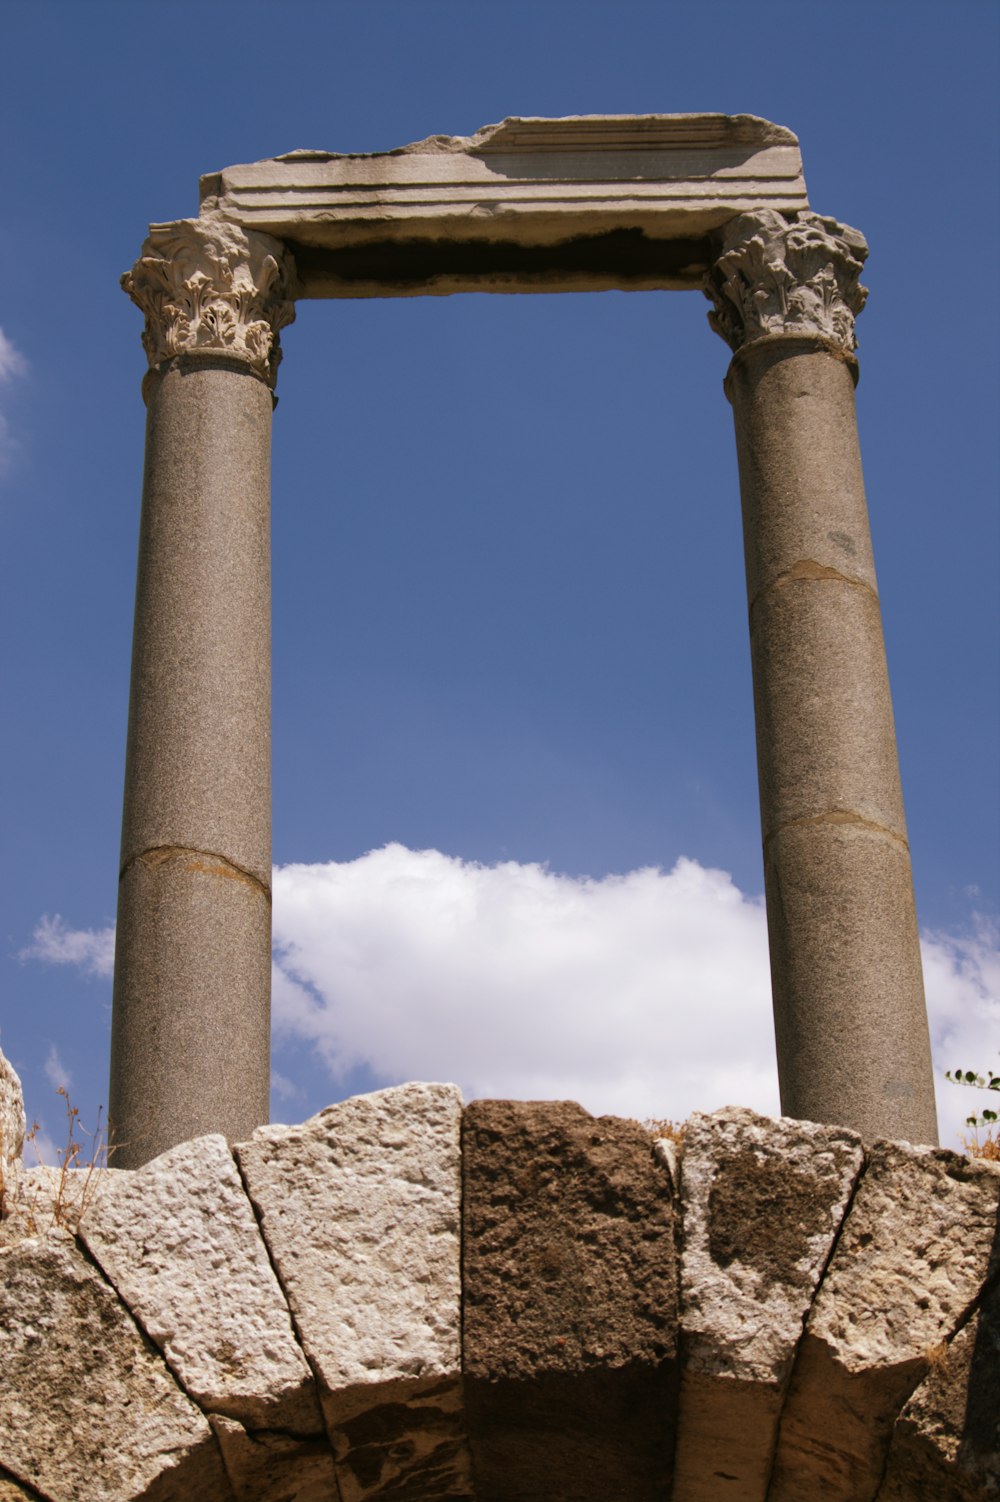 a large stone structure with two pillars in the middle of it